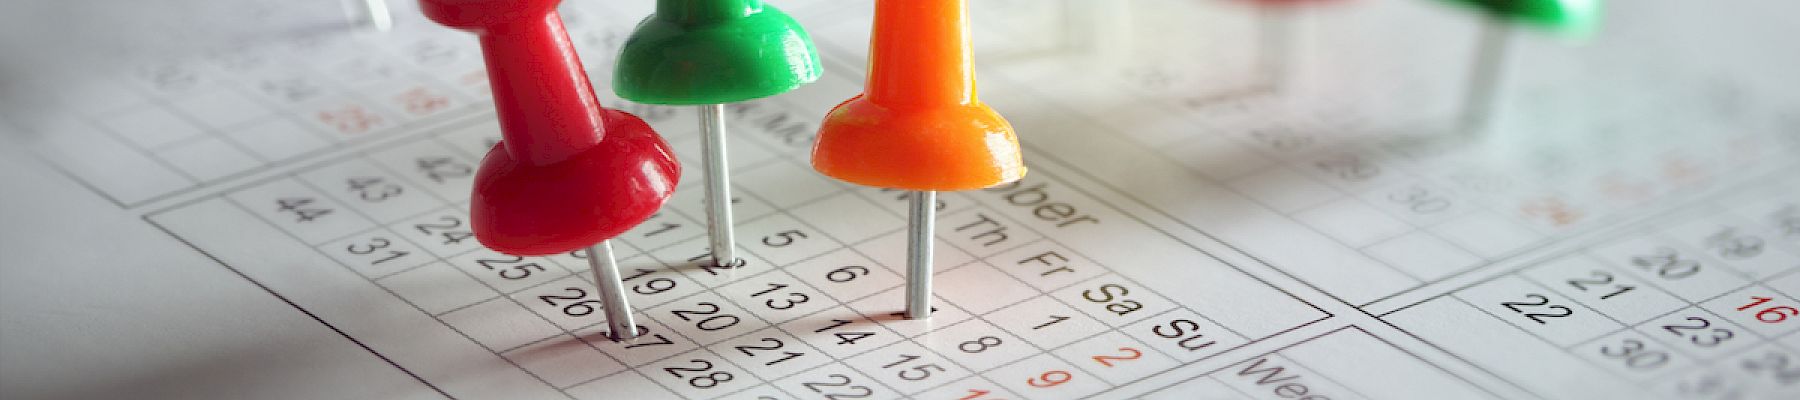 Colorful pushpins stuck on a calendar, signifying dates and events.